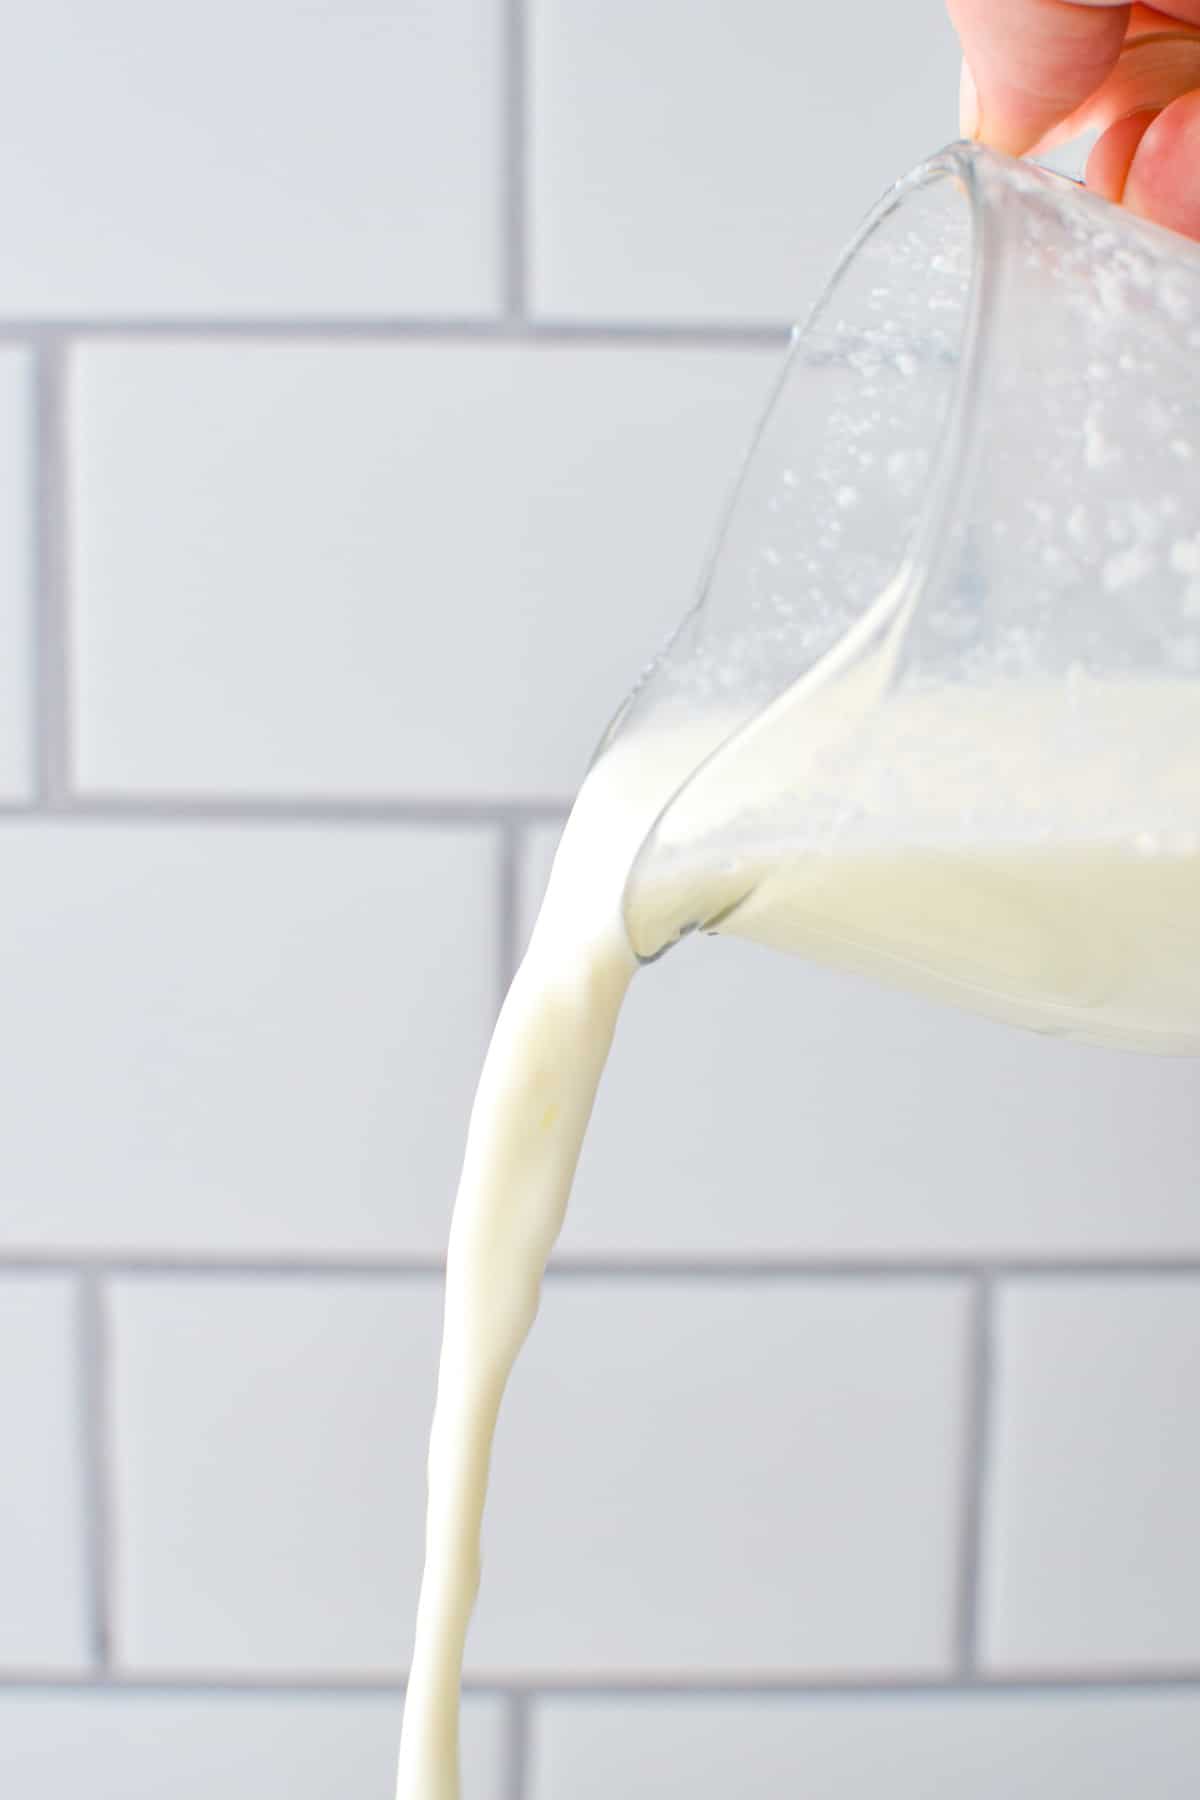 Buttermilk being poured into an imaginary dish